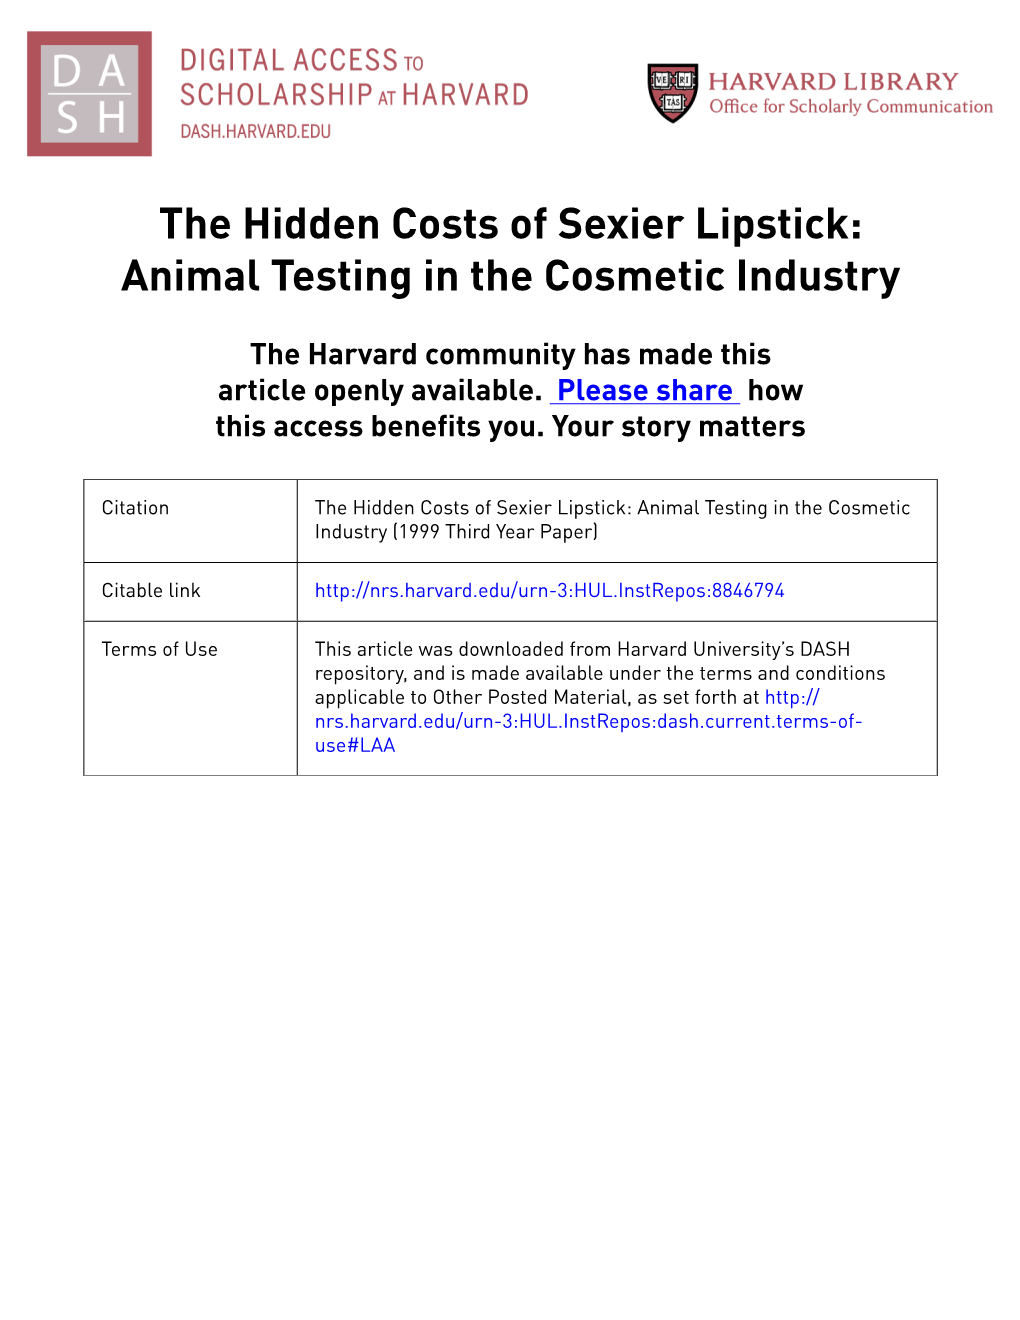 The Hidden Costs of Sexier Lipstick: Animal Testing in the Cosmetic Industry